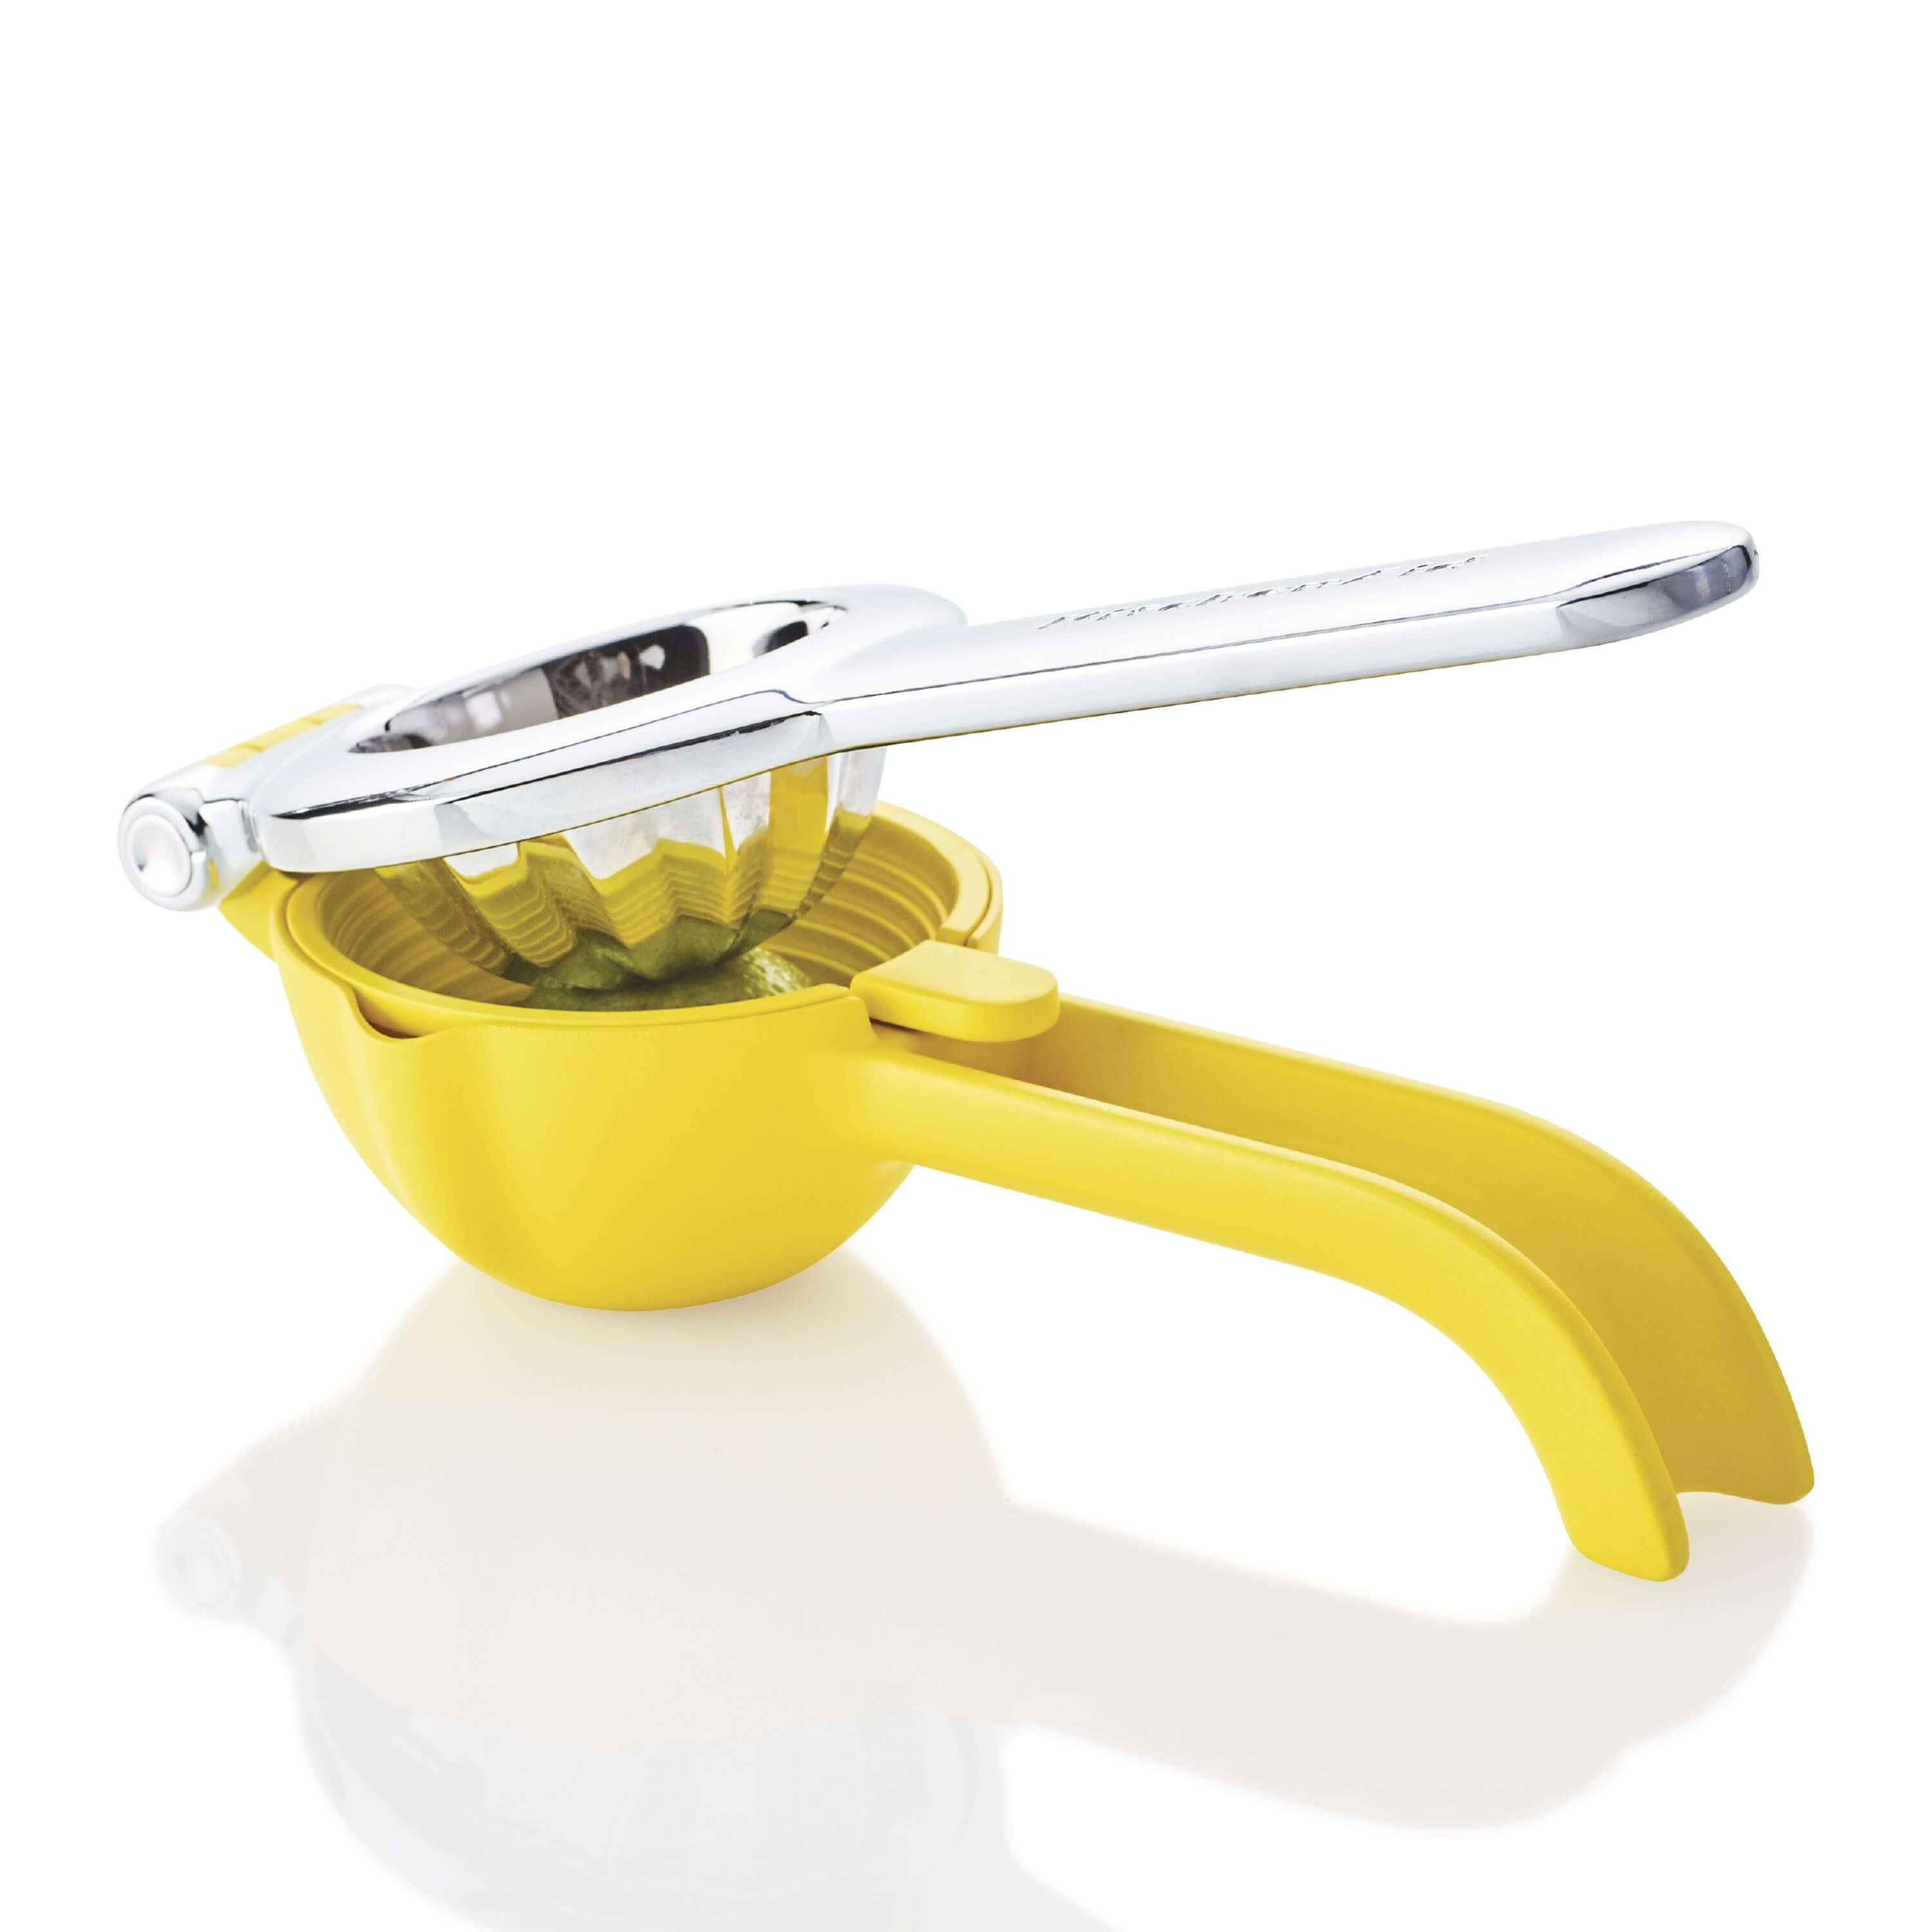 KitchenAid Citrus Juice Press Squeezer for Lemons and Limes with Seed Catcher and Pour Spout, Green, 8 Inches